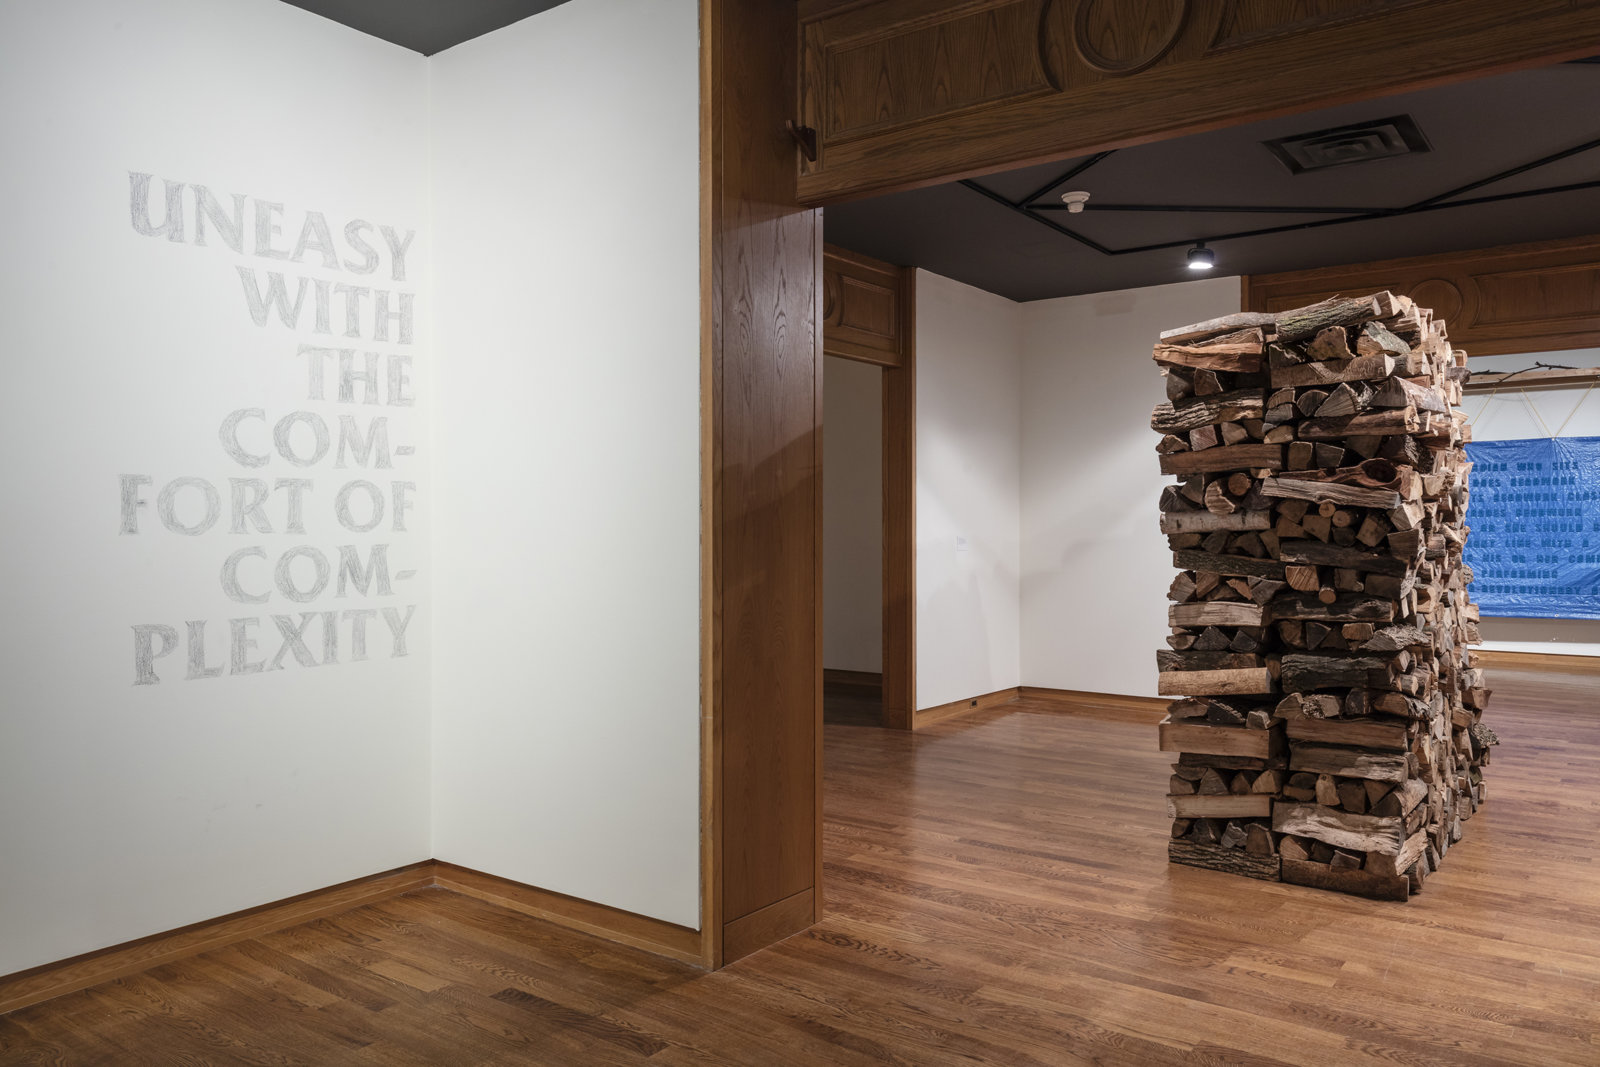 Raymond Boisjoly, Uneasy with the Comfort of Complexity, 2017, beer can wall rubbing, dimensions variable. Installation view, In Dialogue, Art Museum, Toronto, 2017